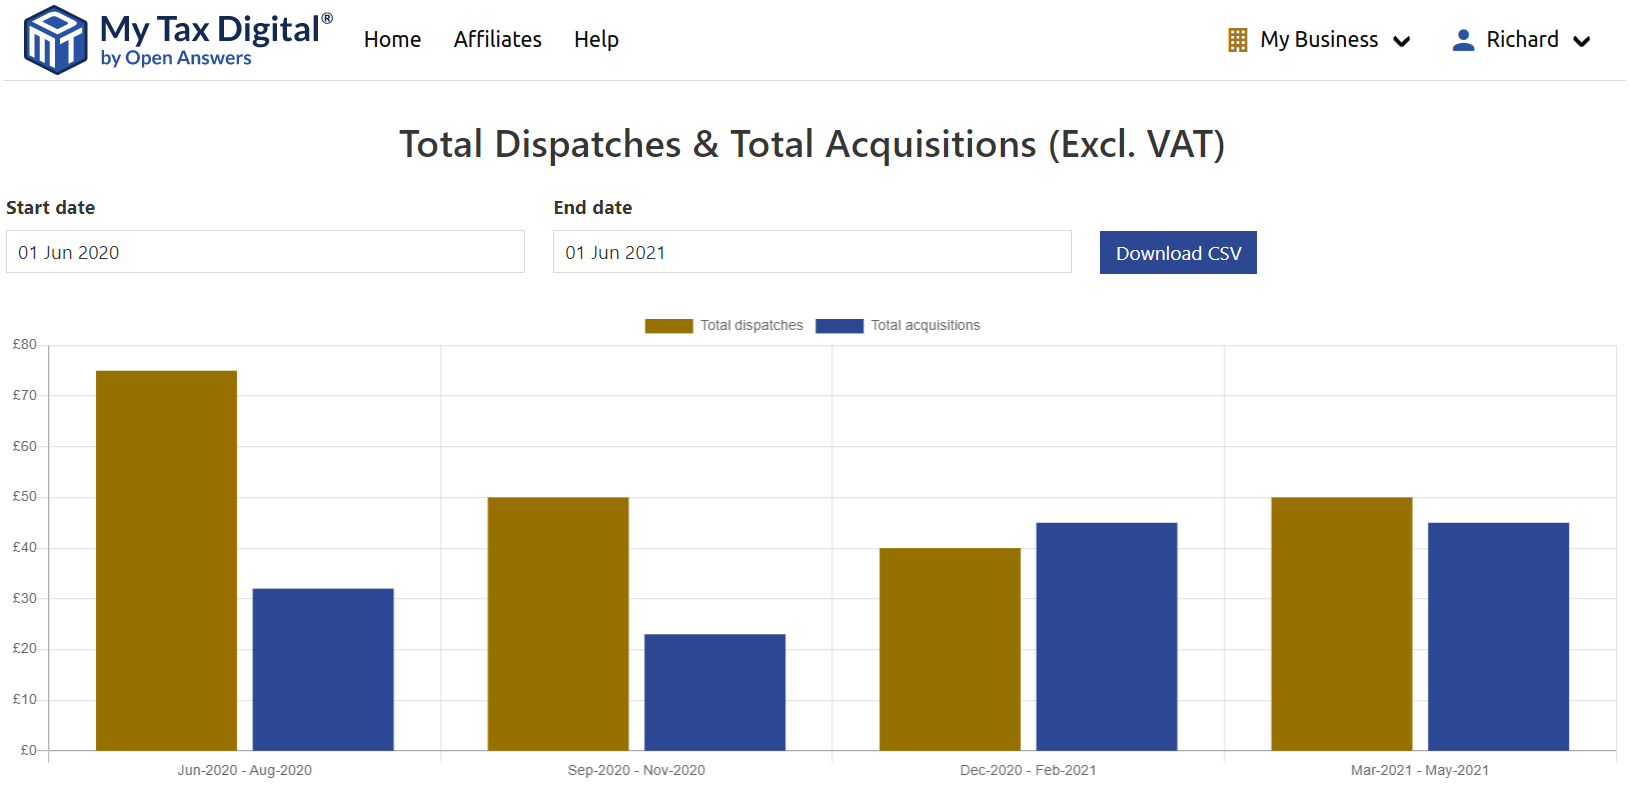 My Tax Digital Total Dispatches & Total Acquisitions (Excl. VAT) bar chart